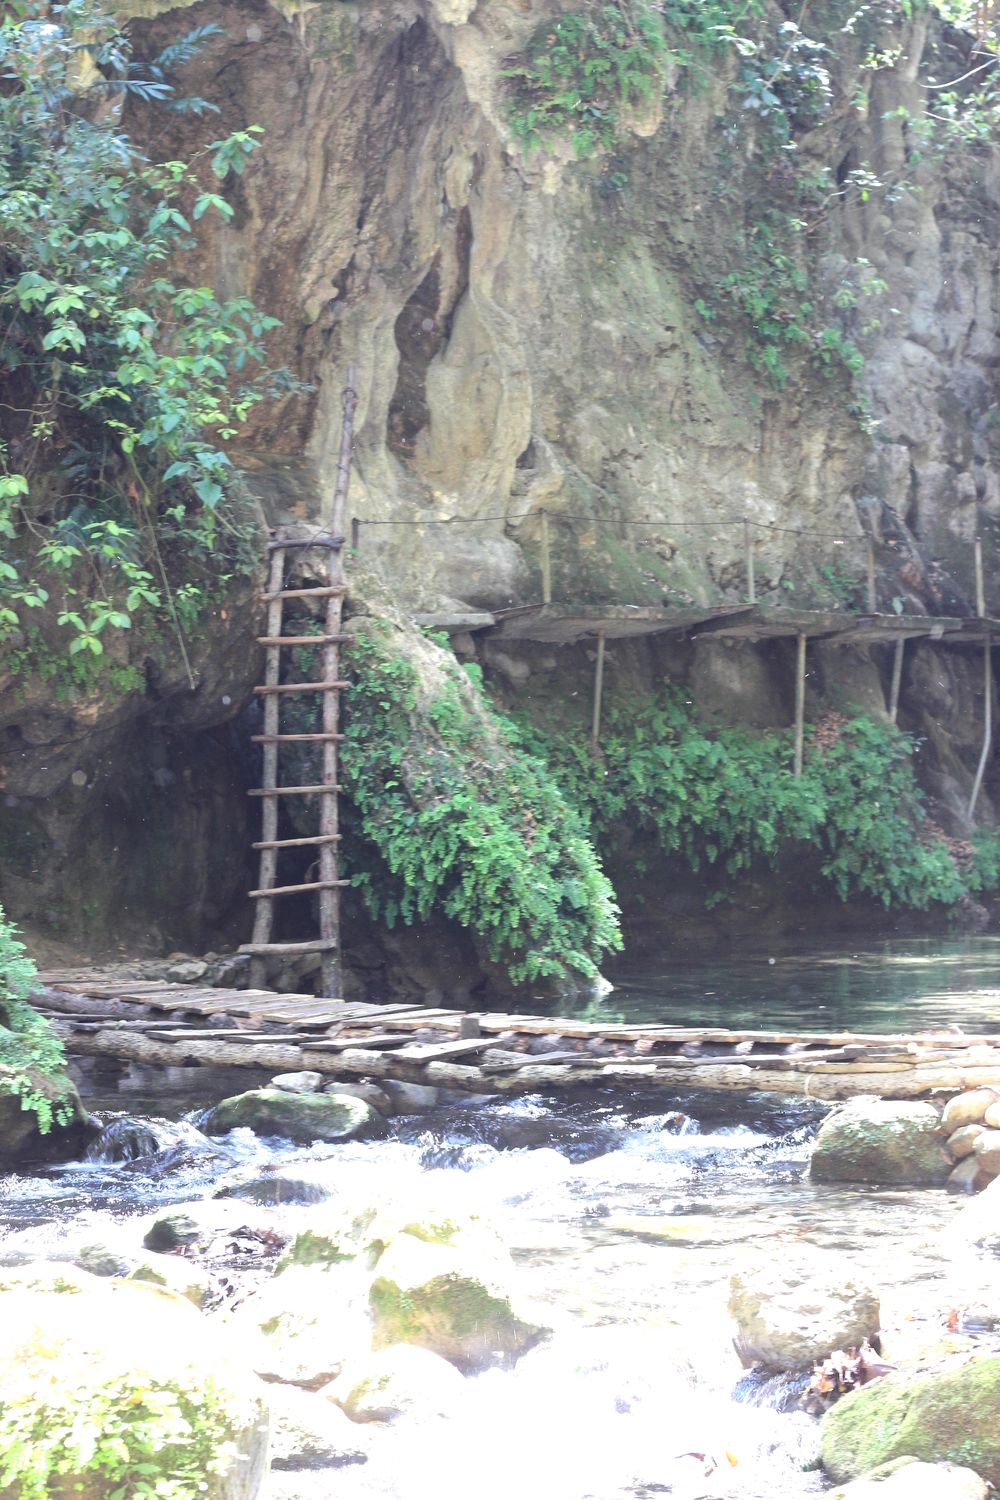 Ladder to foot bridge to more ladders across rivers on the way to Puente de Dios